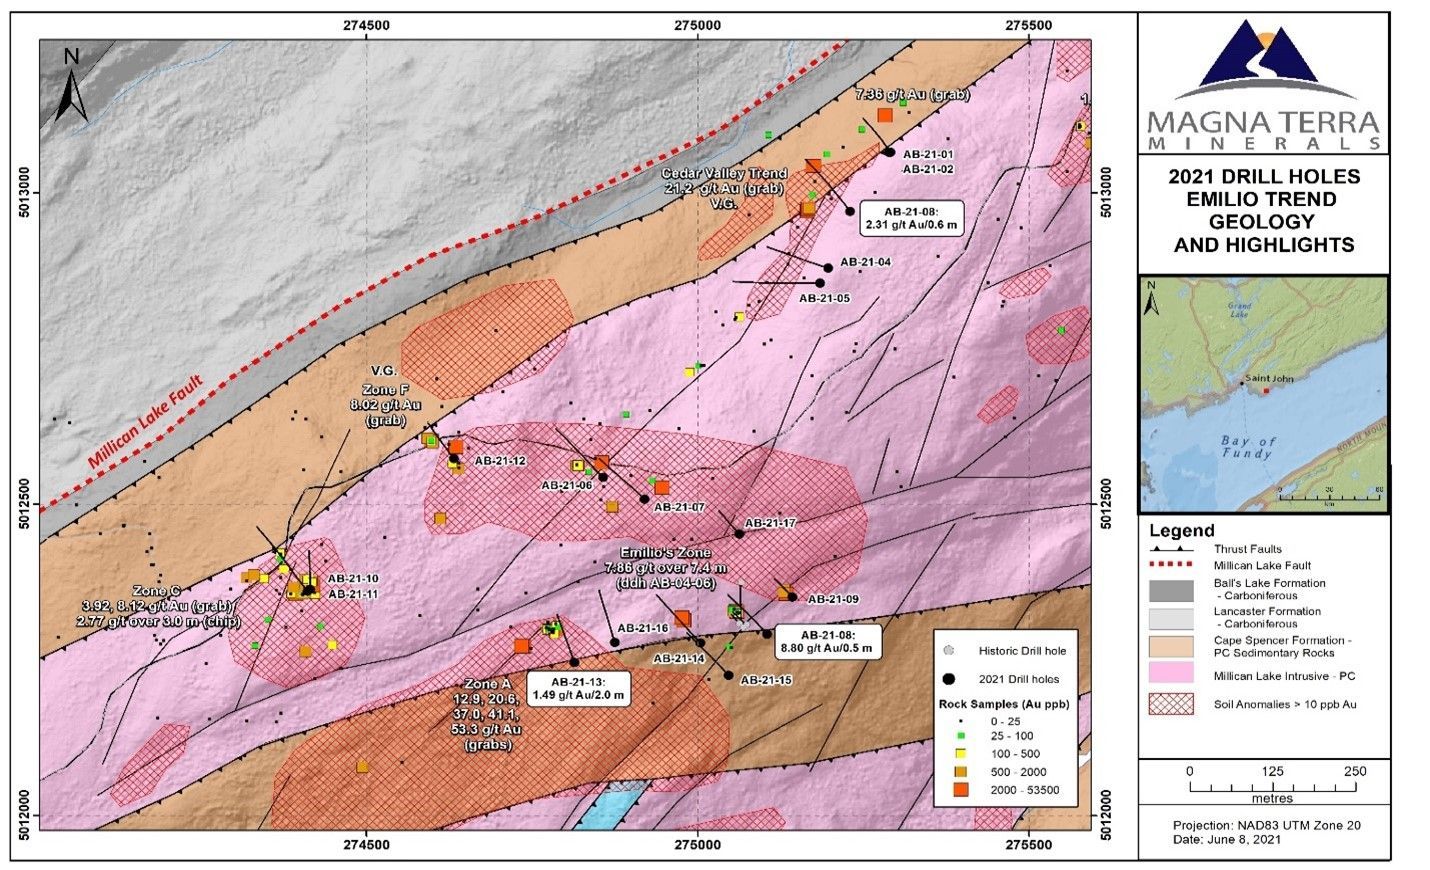 Figure 4: Geology and drill plan map of the Emilio Trend, including the Cedar Valley Trend.